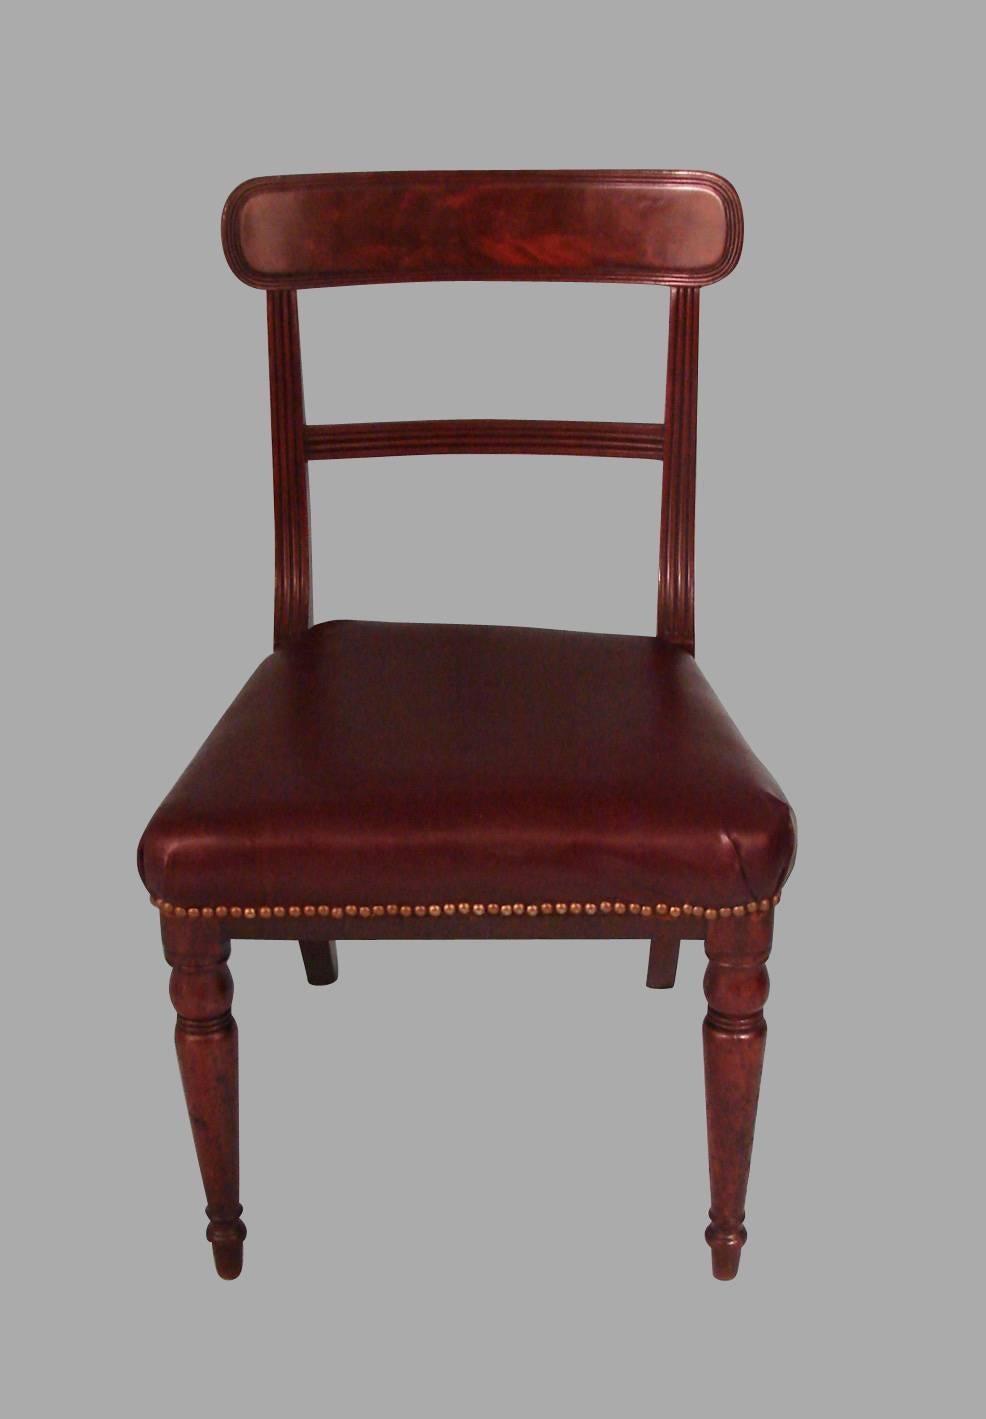 A comfortable and sturdy set of six Regency period side chairs each with a well-figured mahogany back splat supported by reeded stiles, the seats upholstered in claret hide with nailhead trim all supported on turned legs, circa 1820.